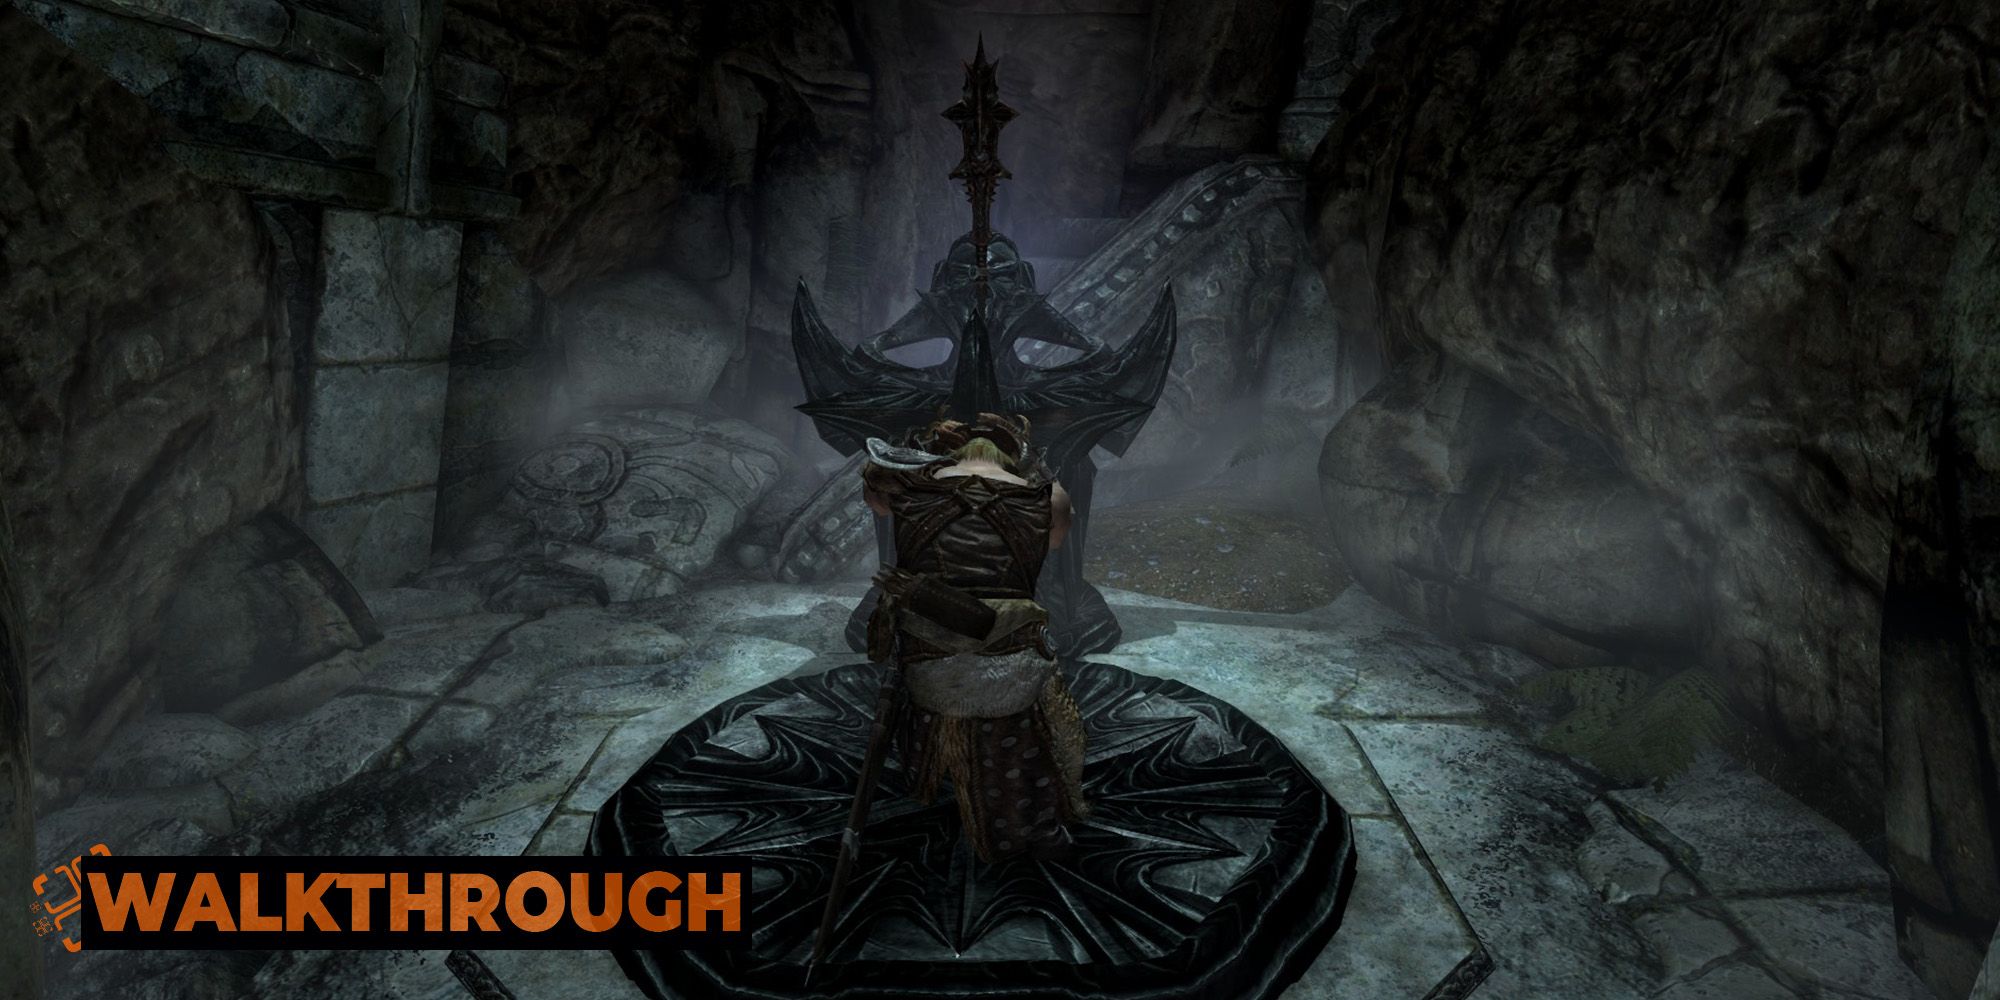 Dragonborn in the House Of Horrors quest in Skyrim